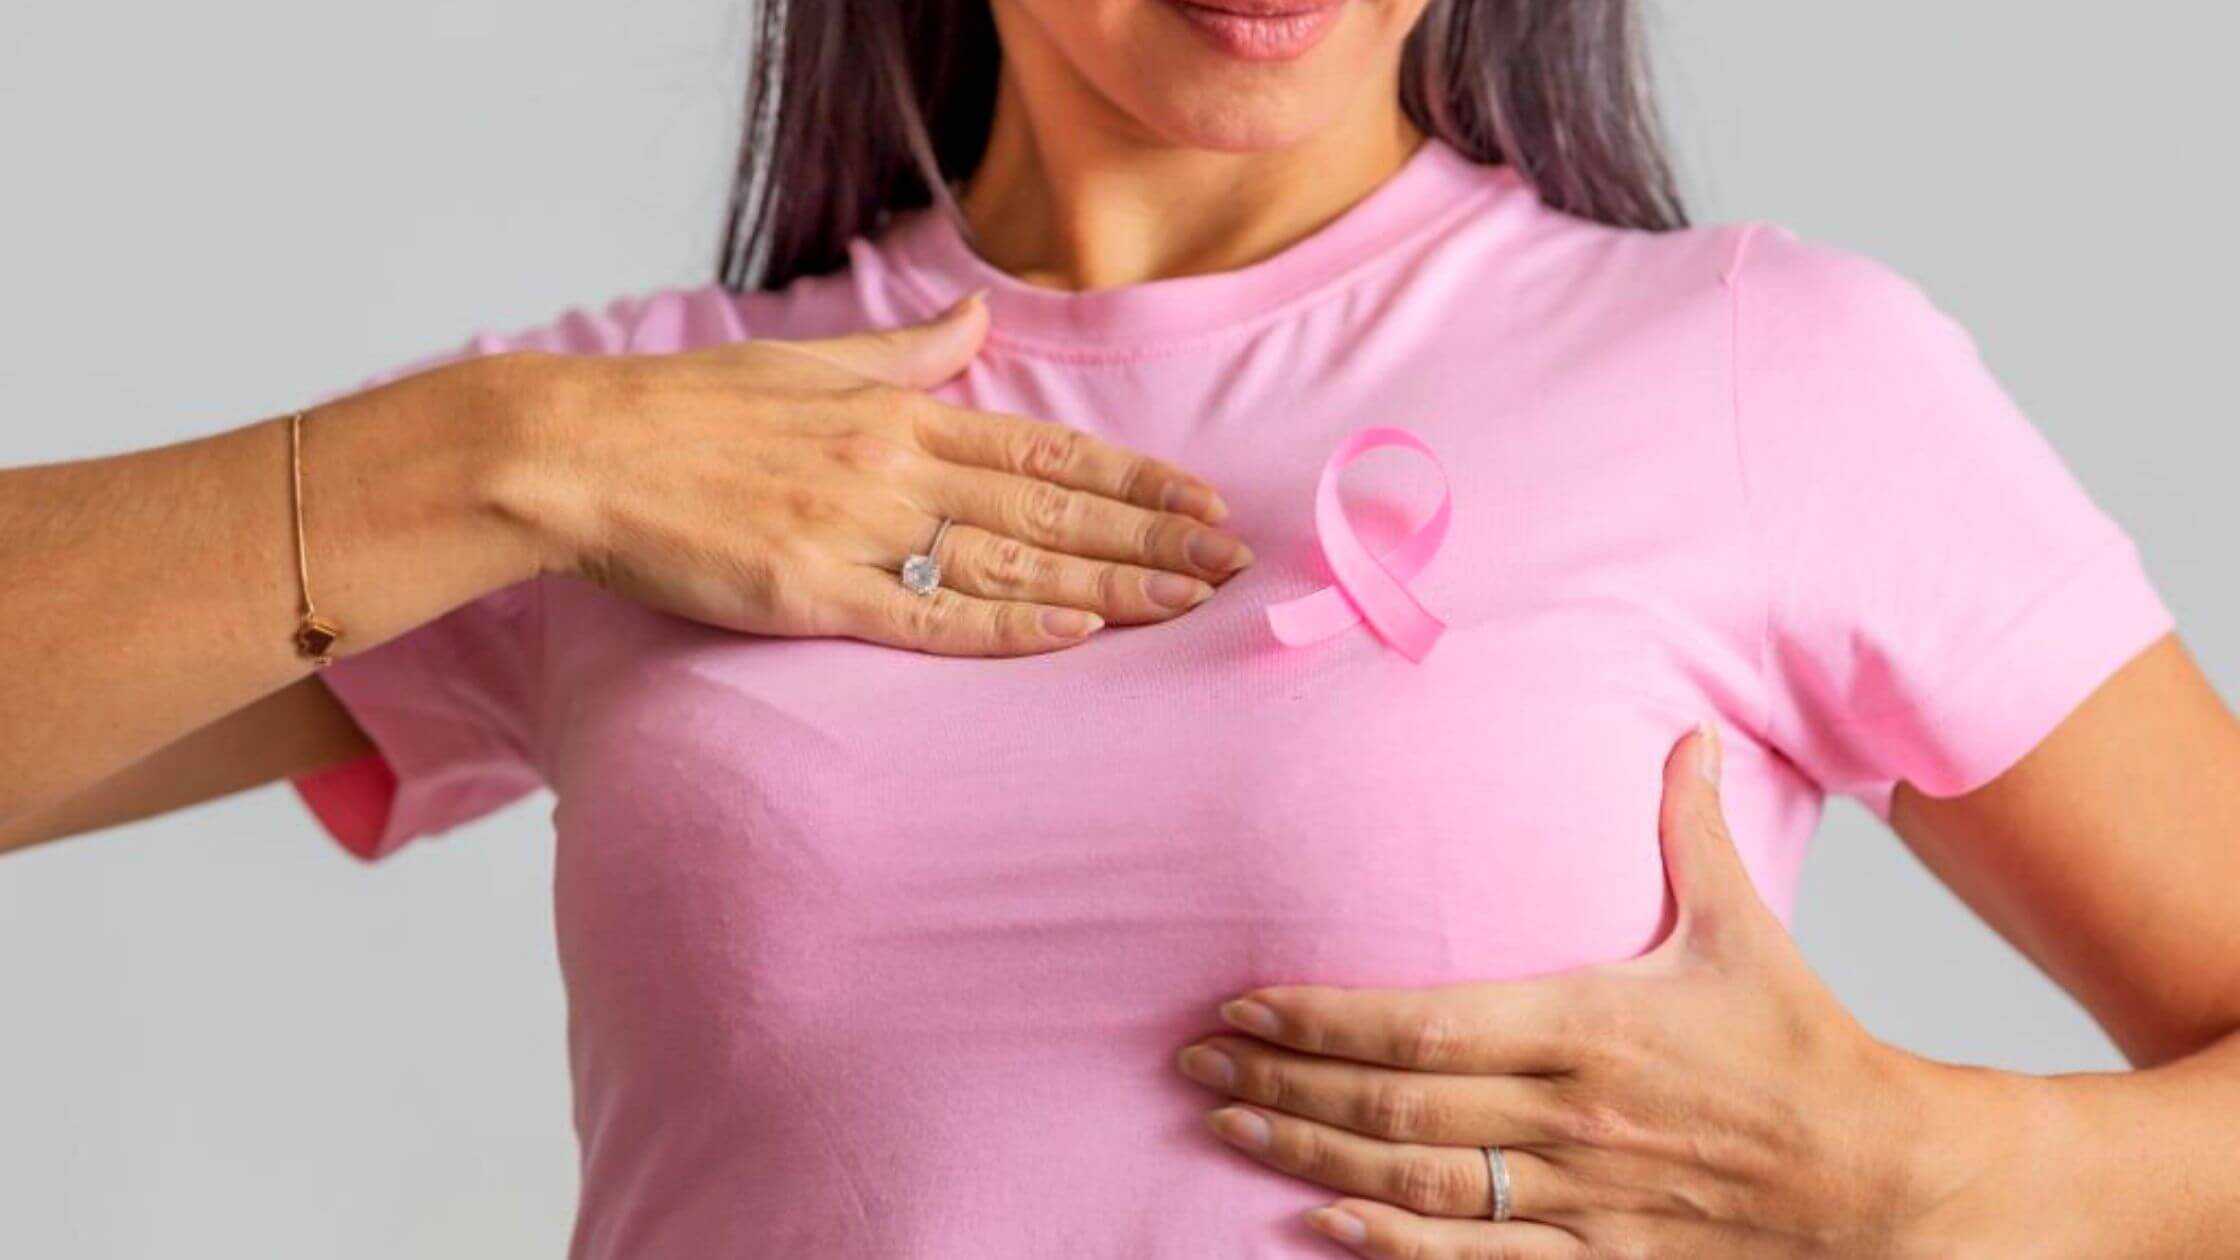 International Day Against Breast Cancer- Why It Is So Important